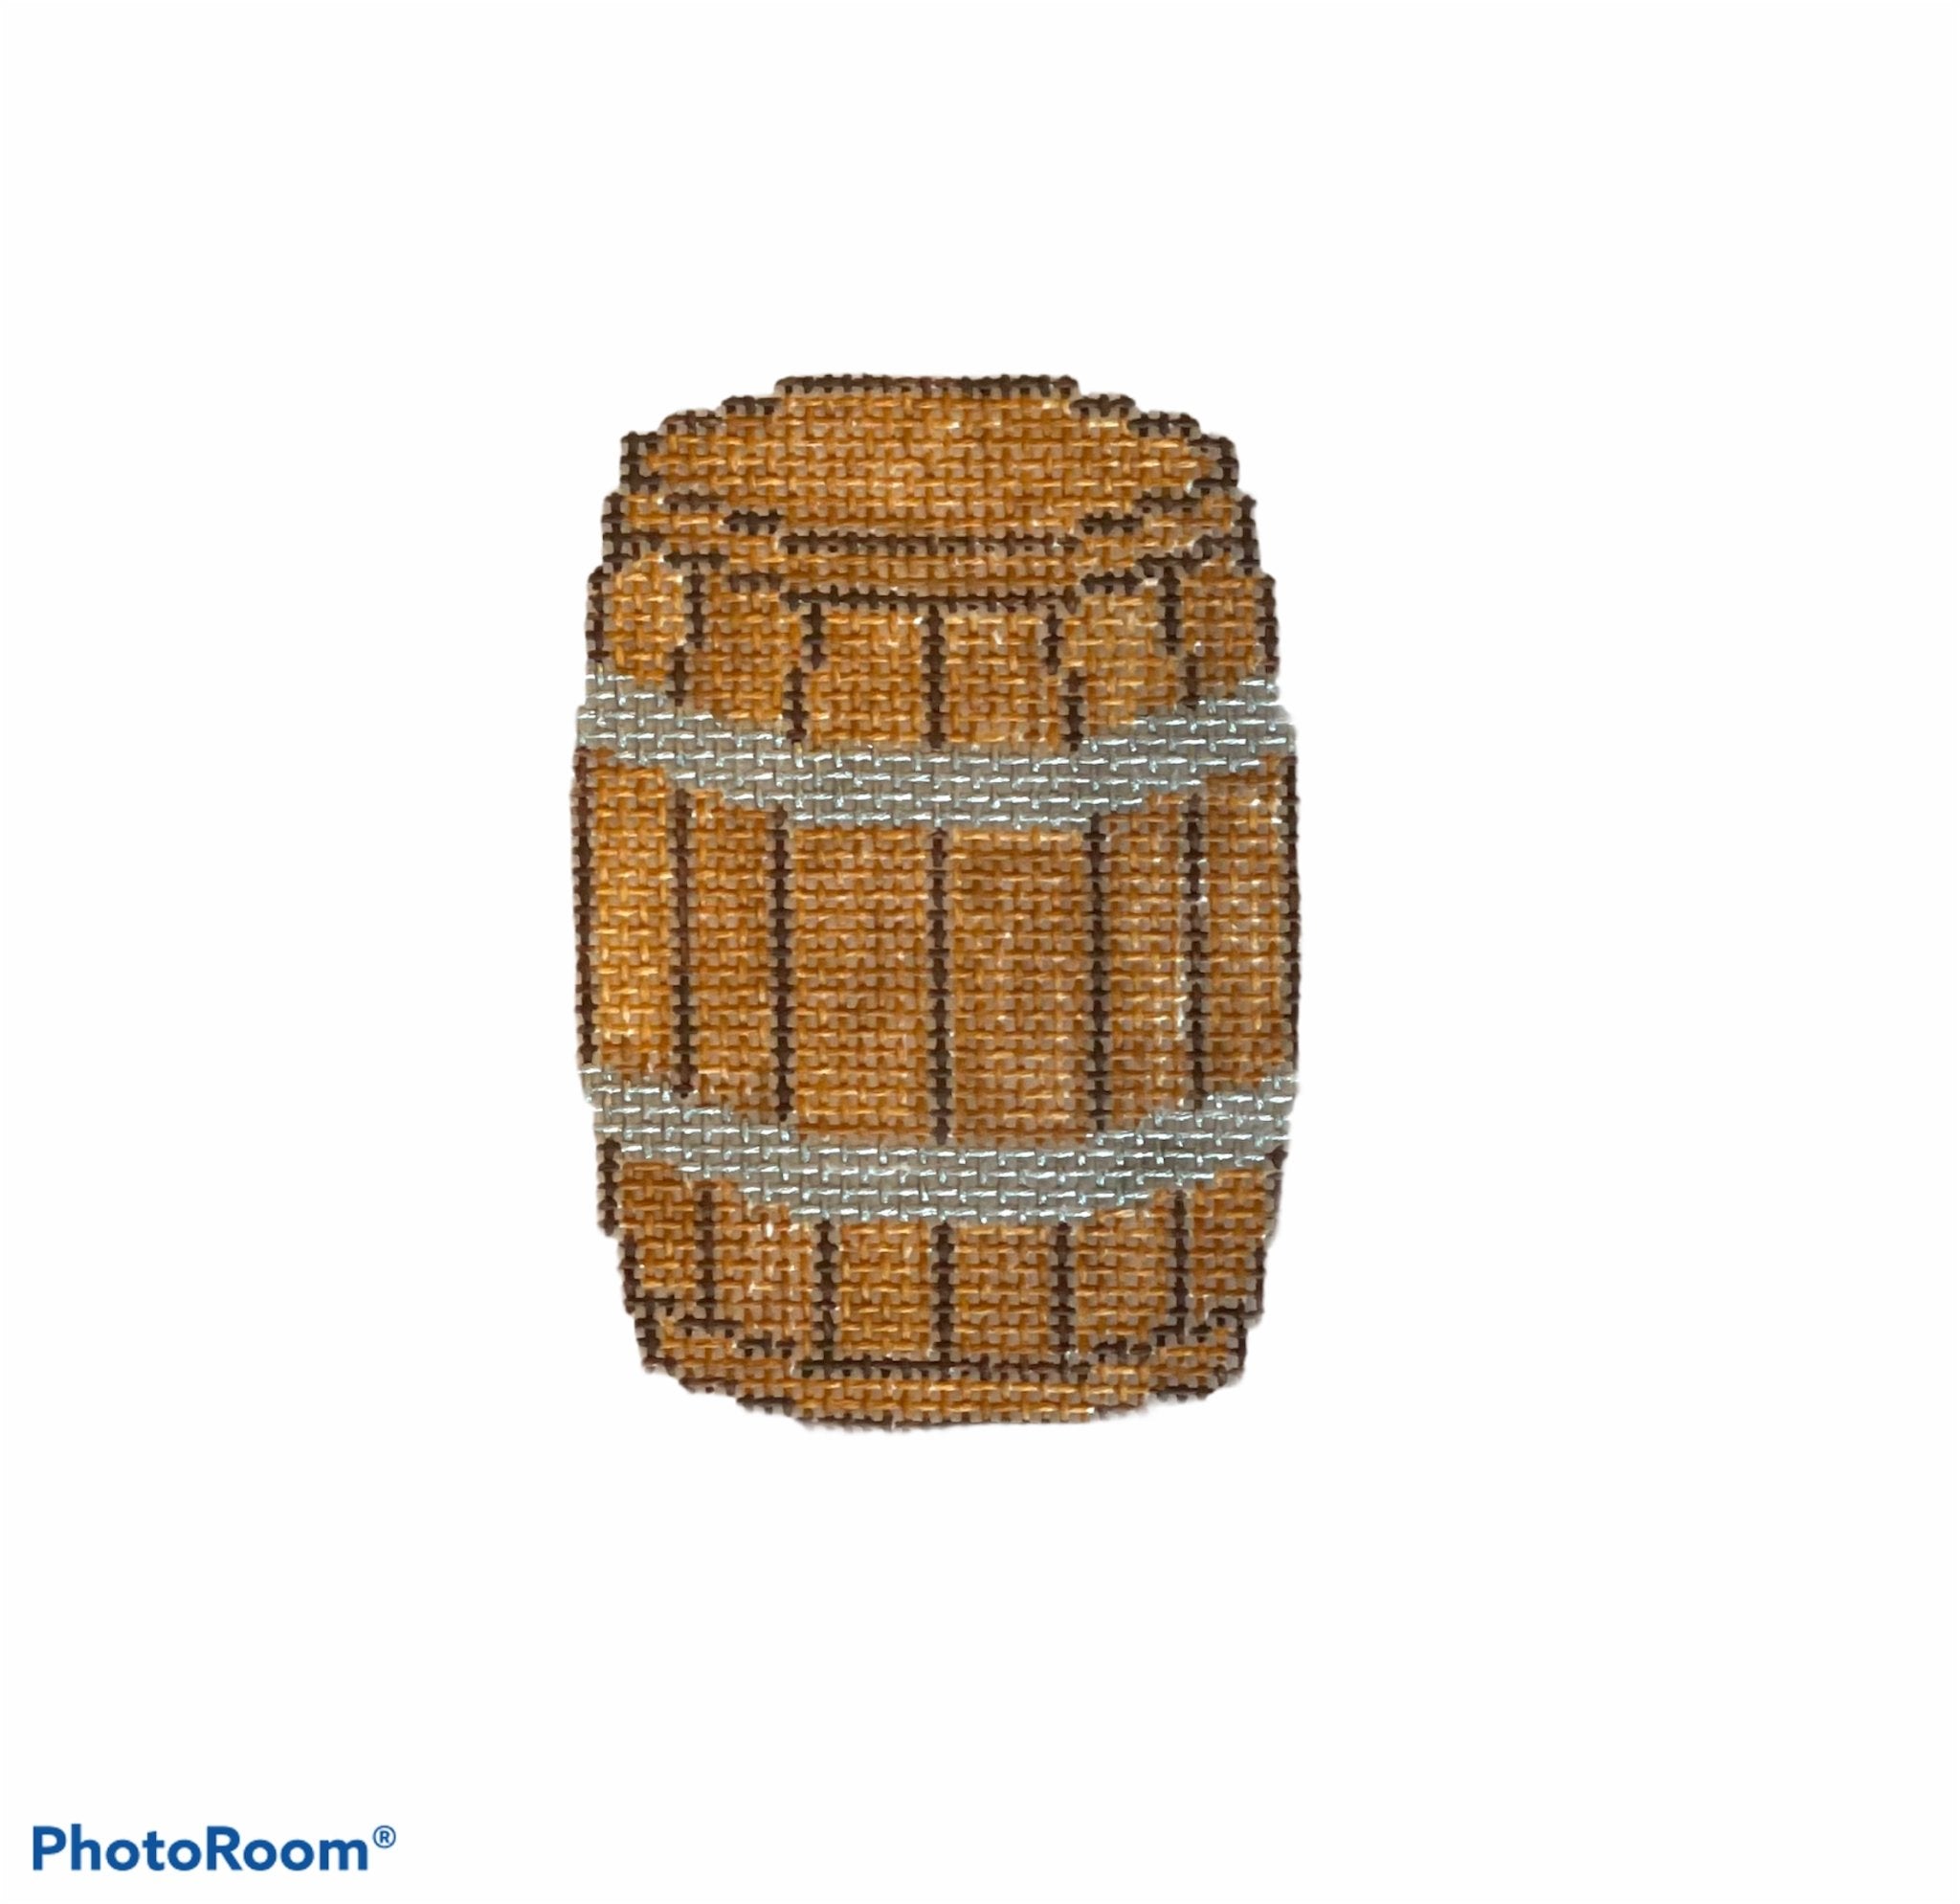 Bourbon Barrel Canvas 2 by 3 - Needlepoint by Laura